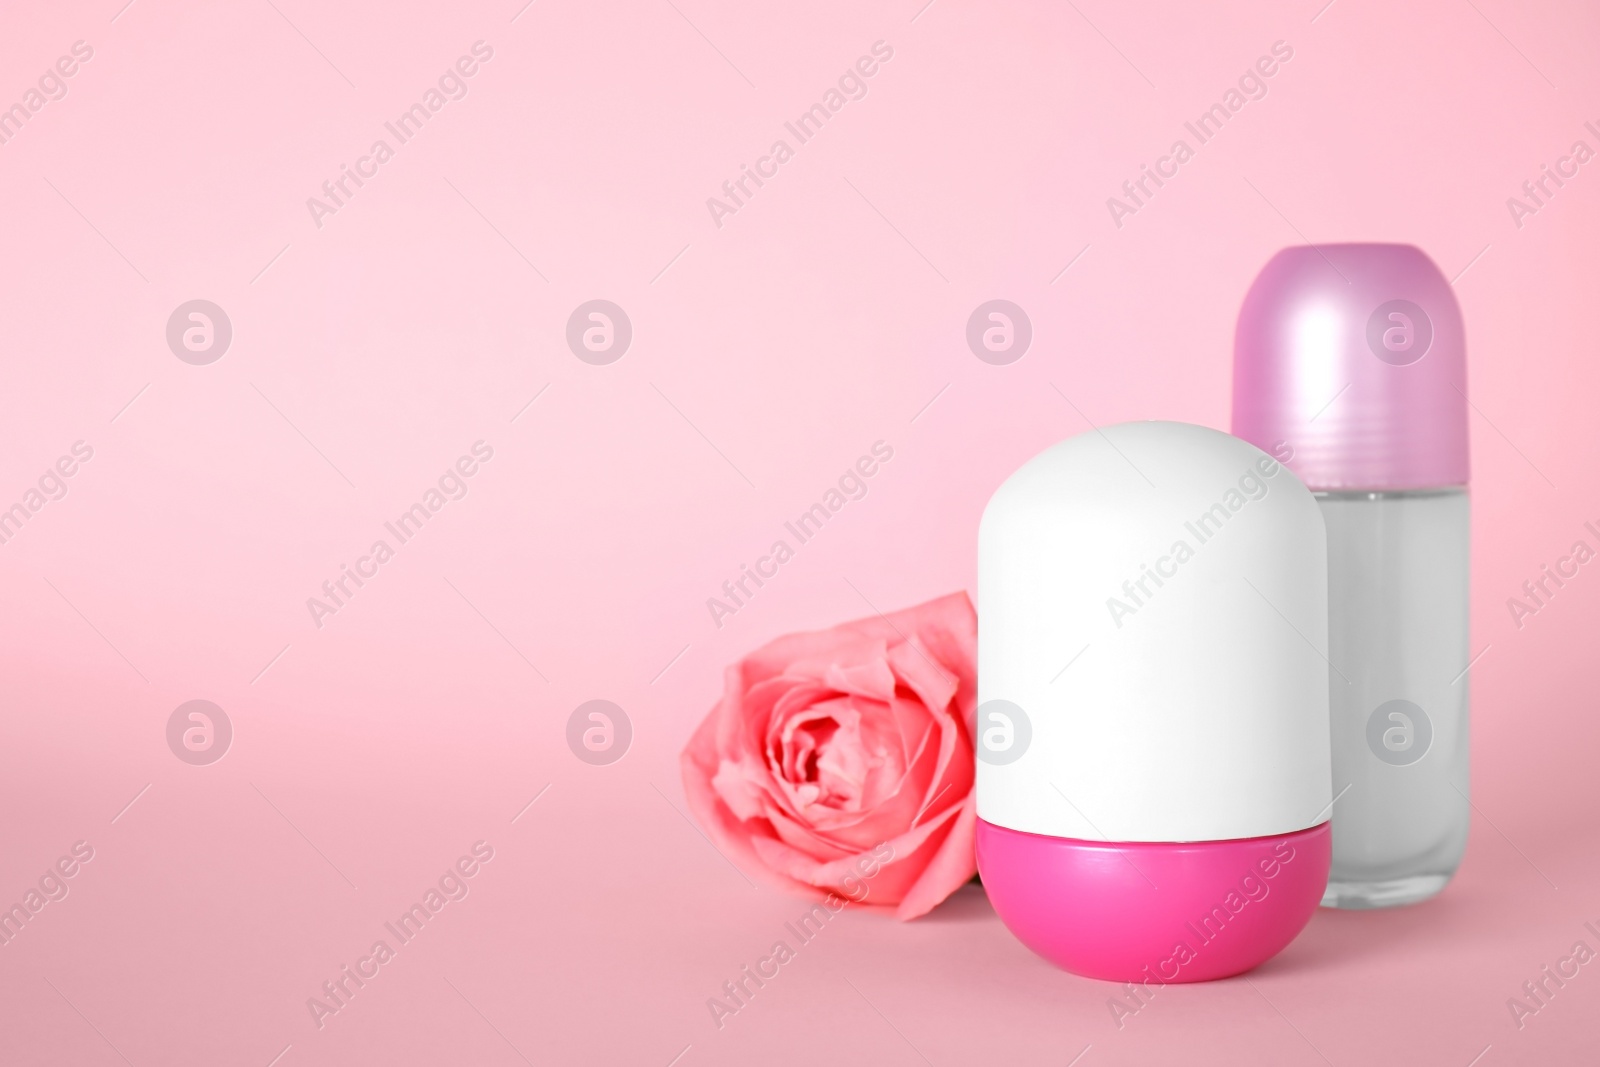 Photo of Natural female roll-on deodorants and rose on pink background, space for text